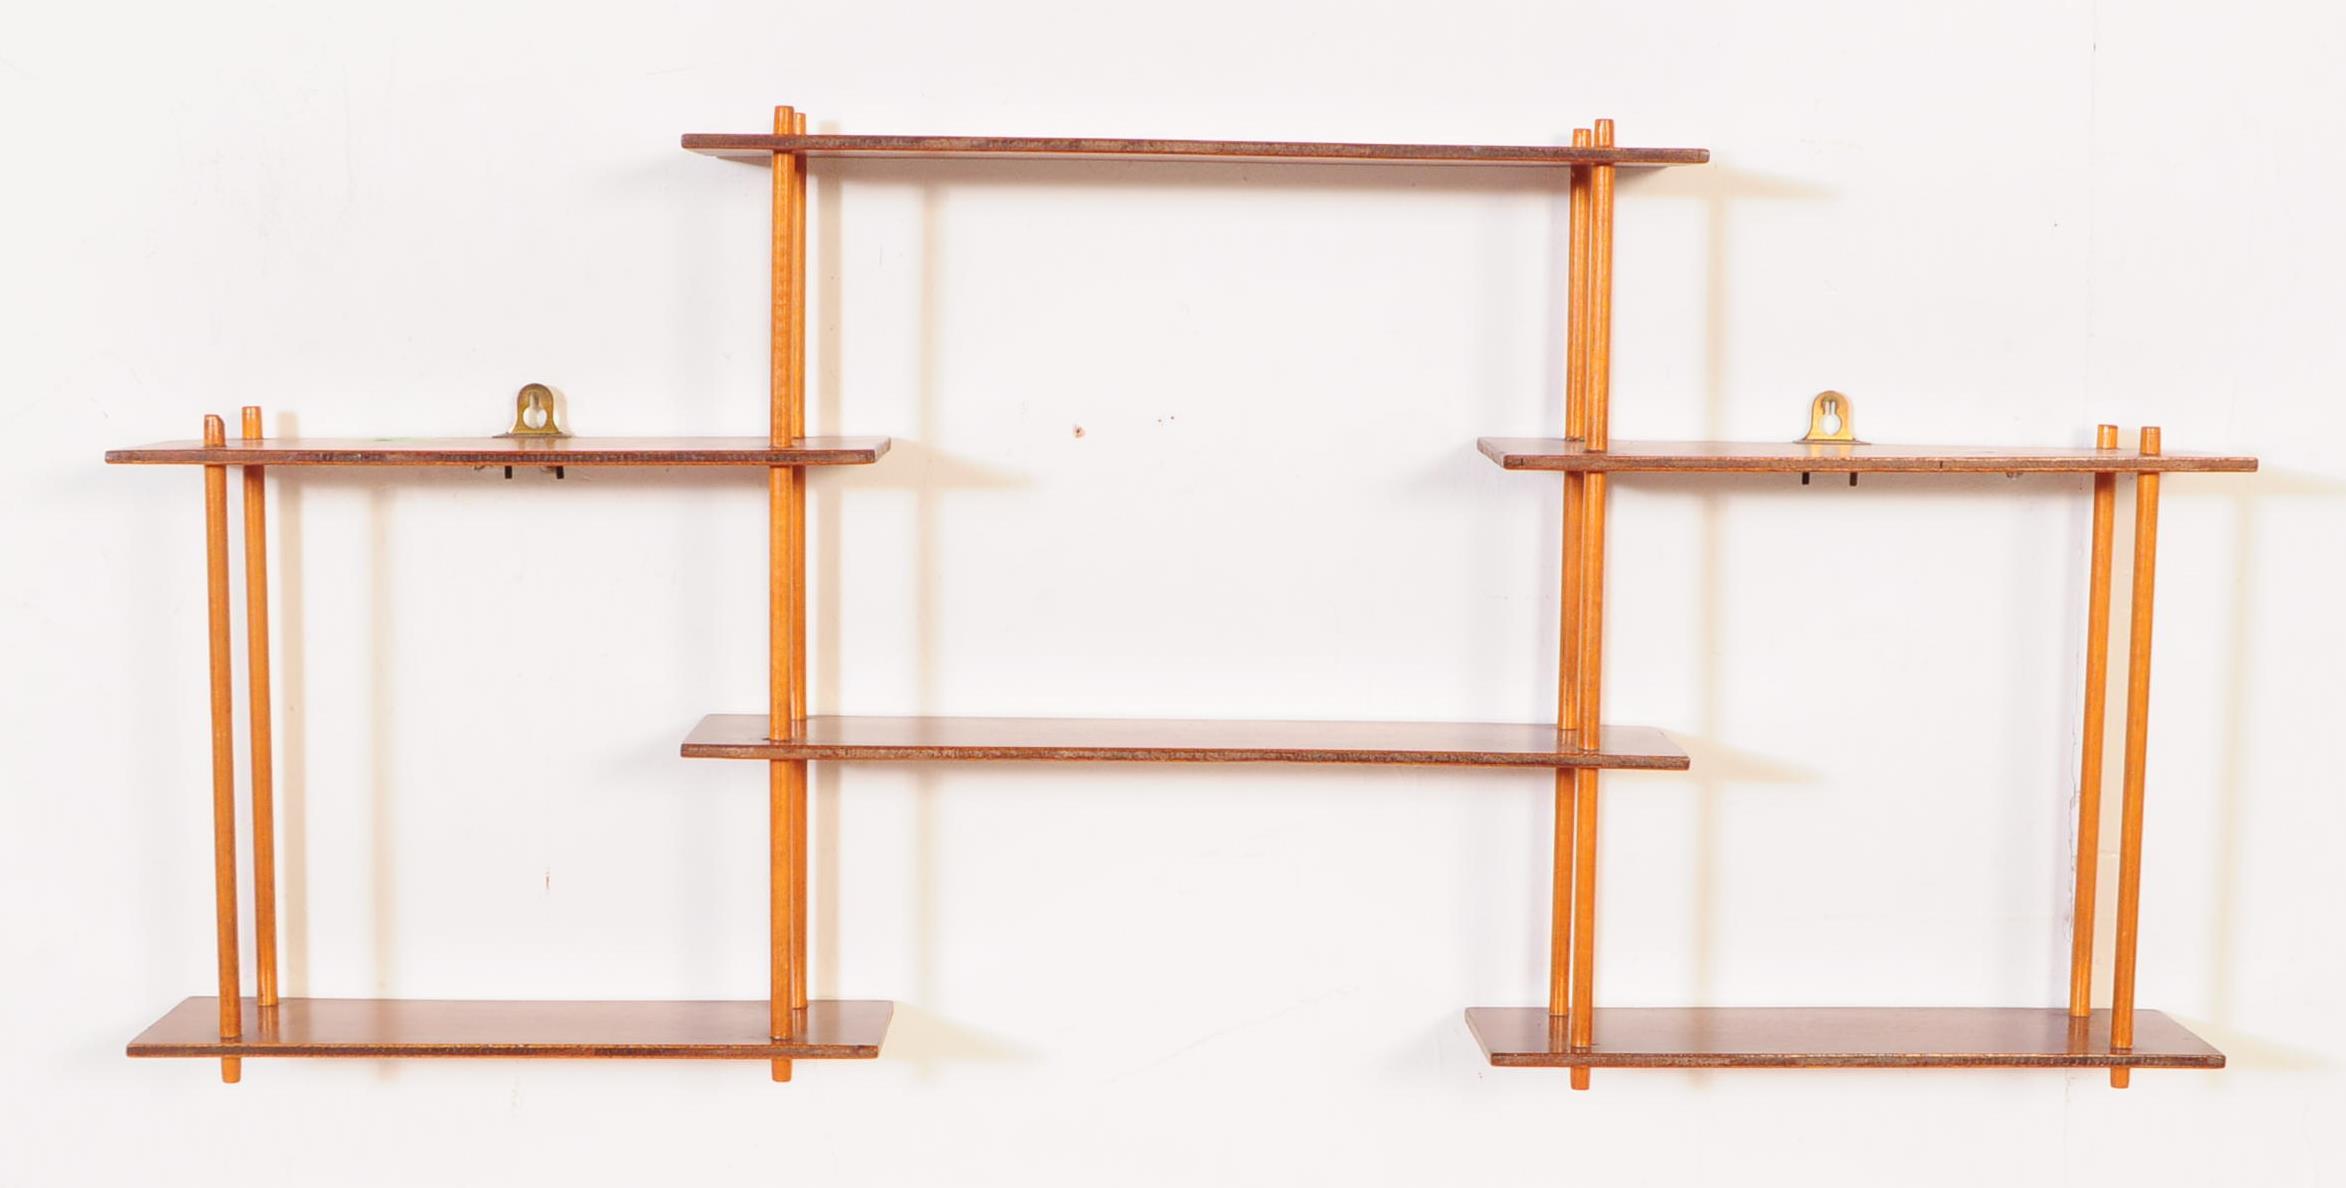 PAIR OF MID CENTURY WALL MOUNTED ETAGERE BOOKCASES - Image 2 of 6